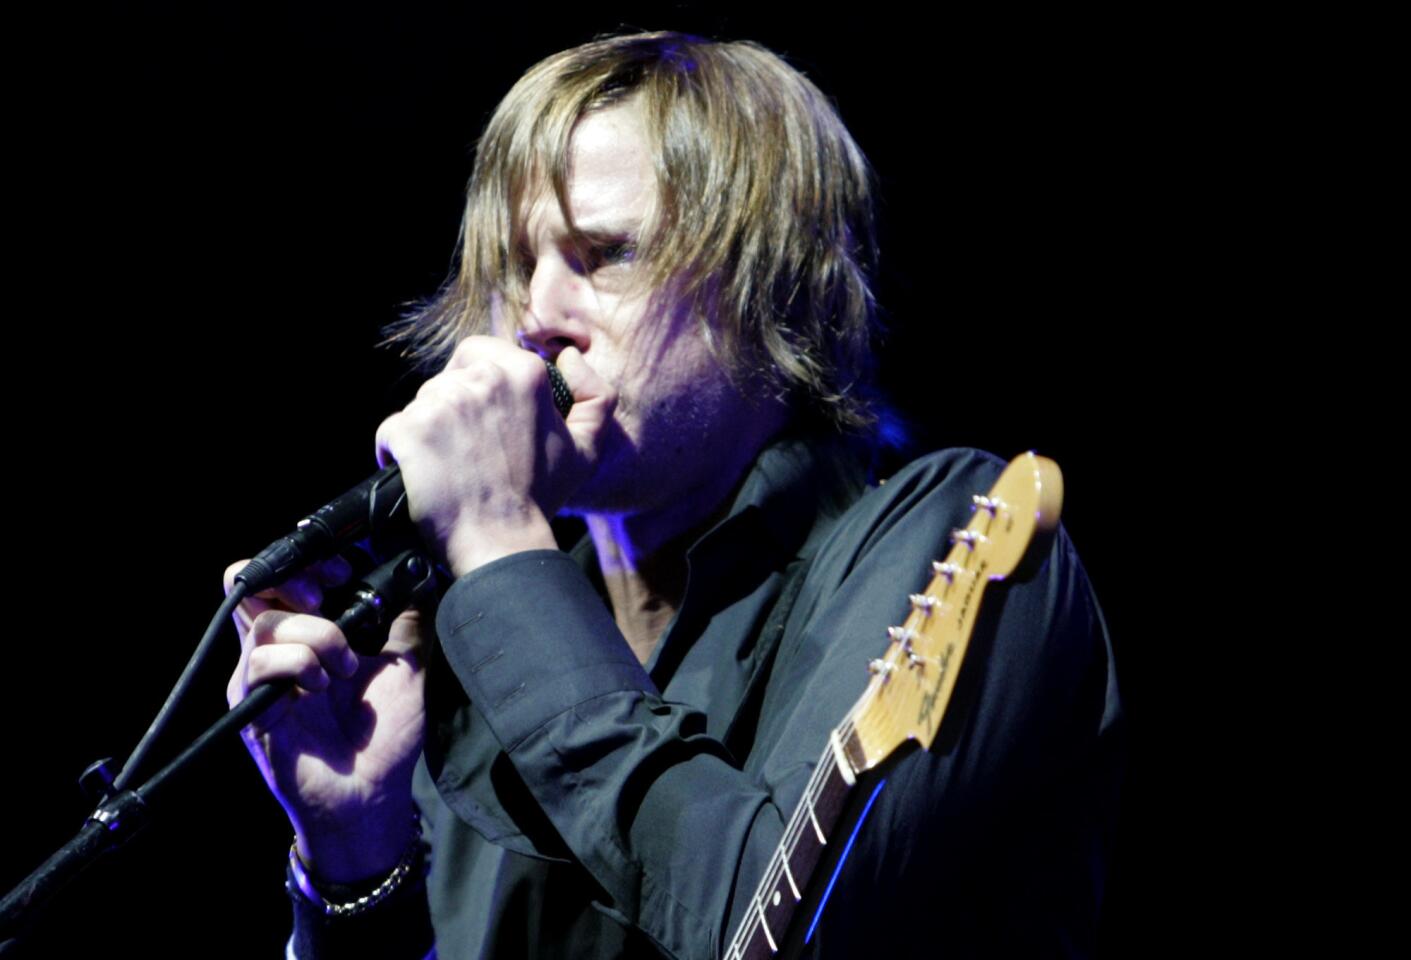 Paul Banks, lead singer, lyricist and guitarist of the New York City based band Interpol, during first day of 8th annual Coachella Valley Music and Arts Festival, Friday, April 27, 2007.